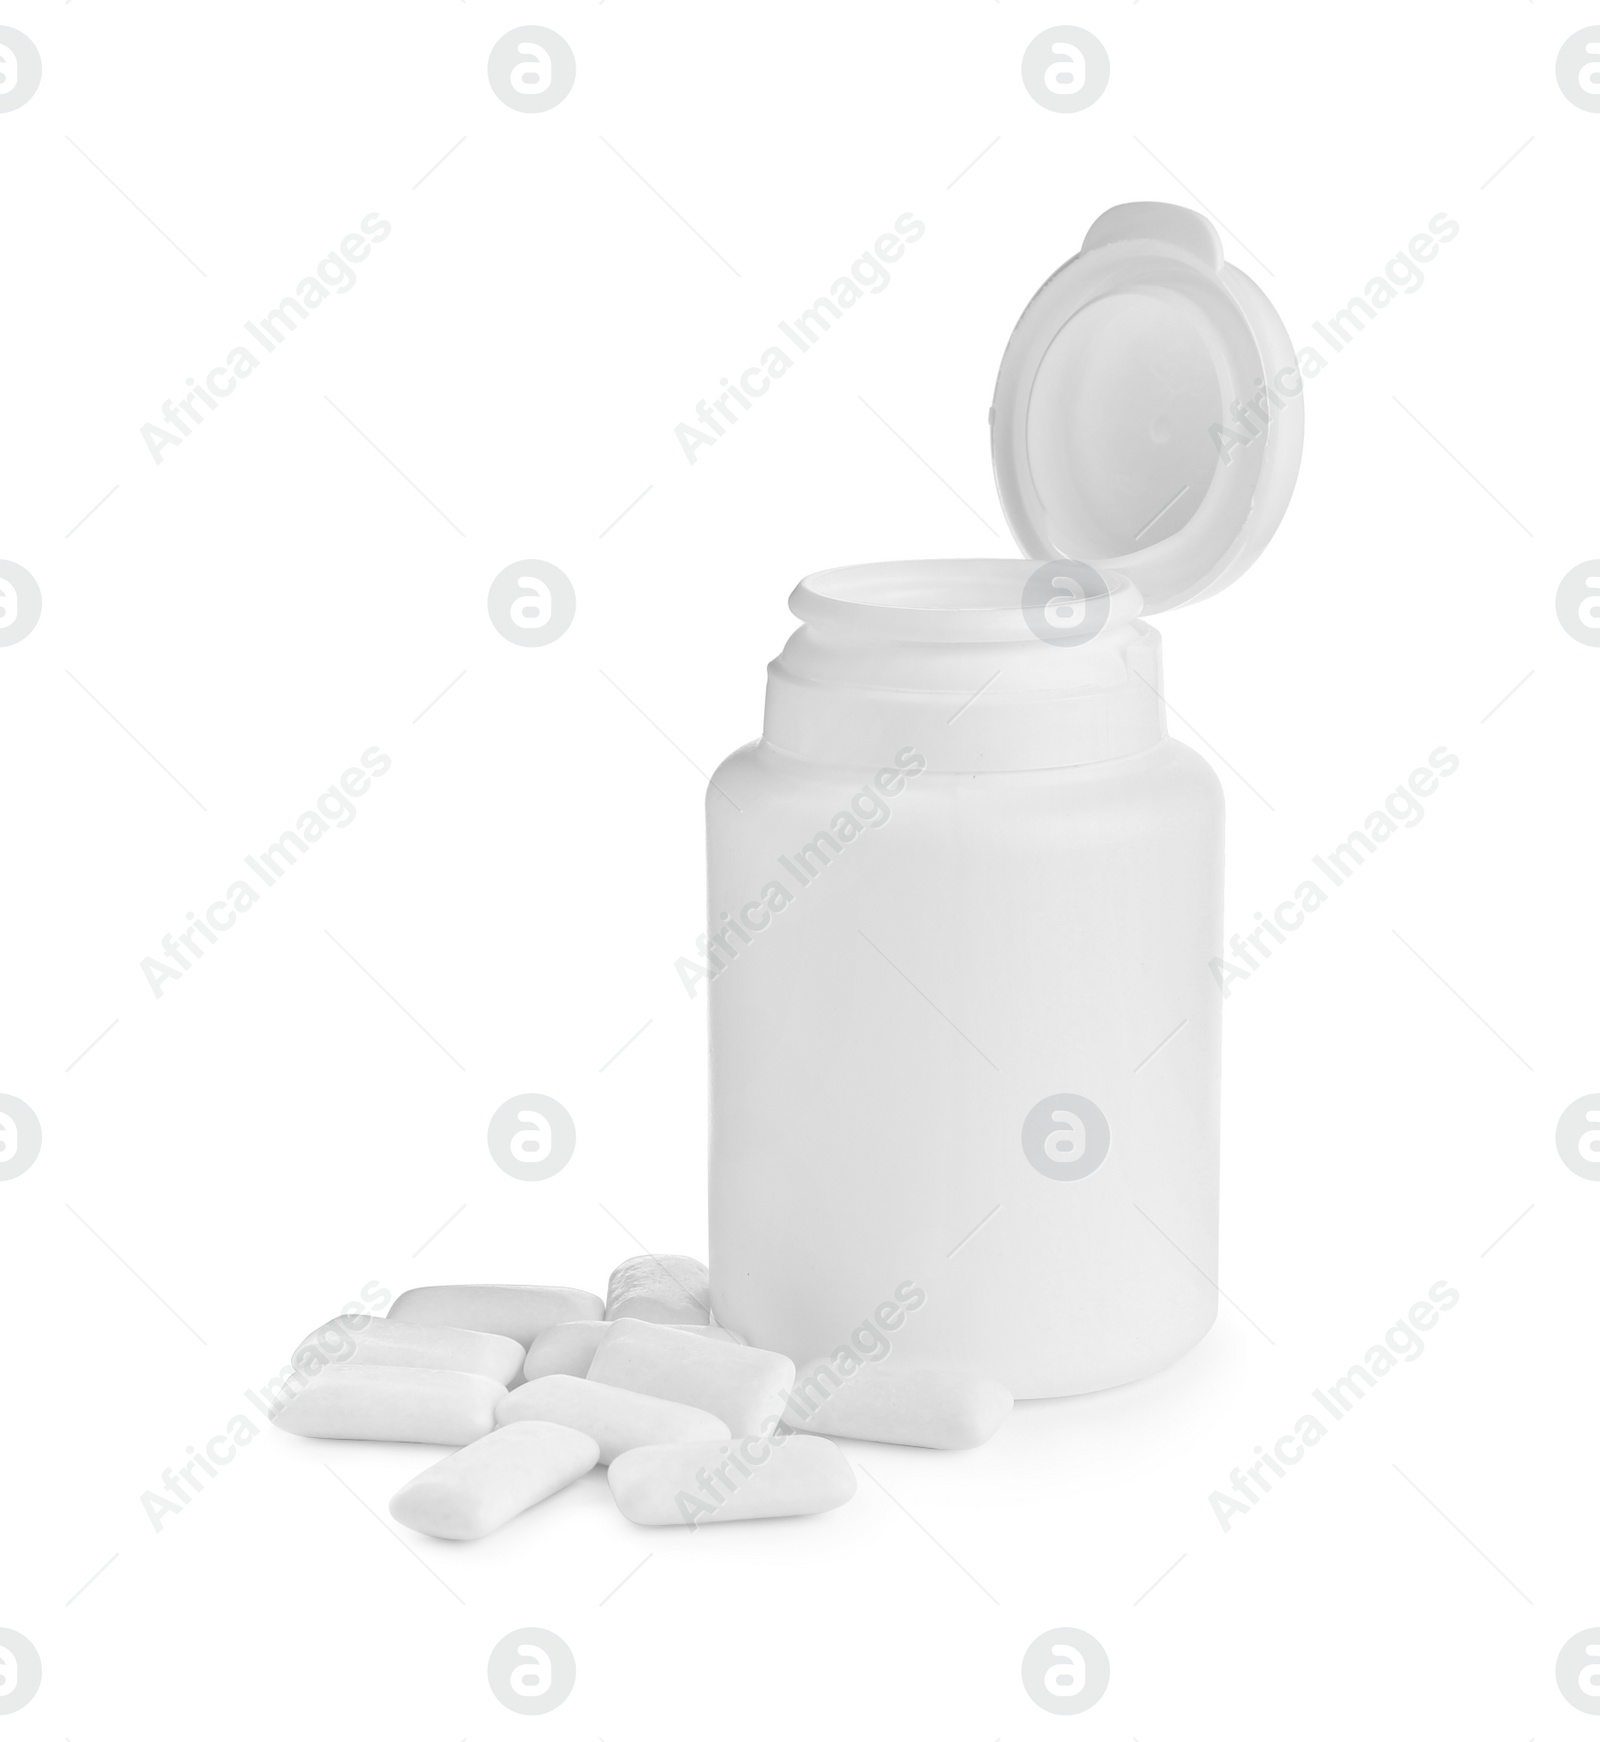 Photo of Chewing gum pieces and jar on white background